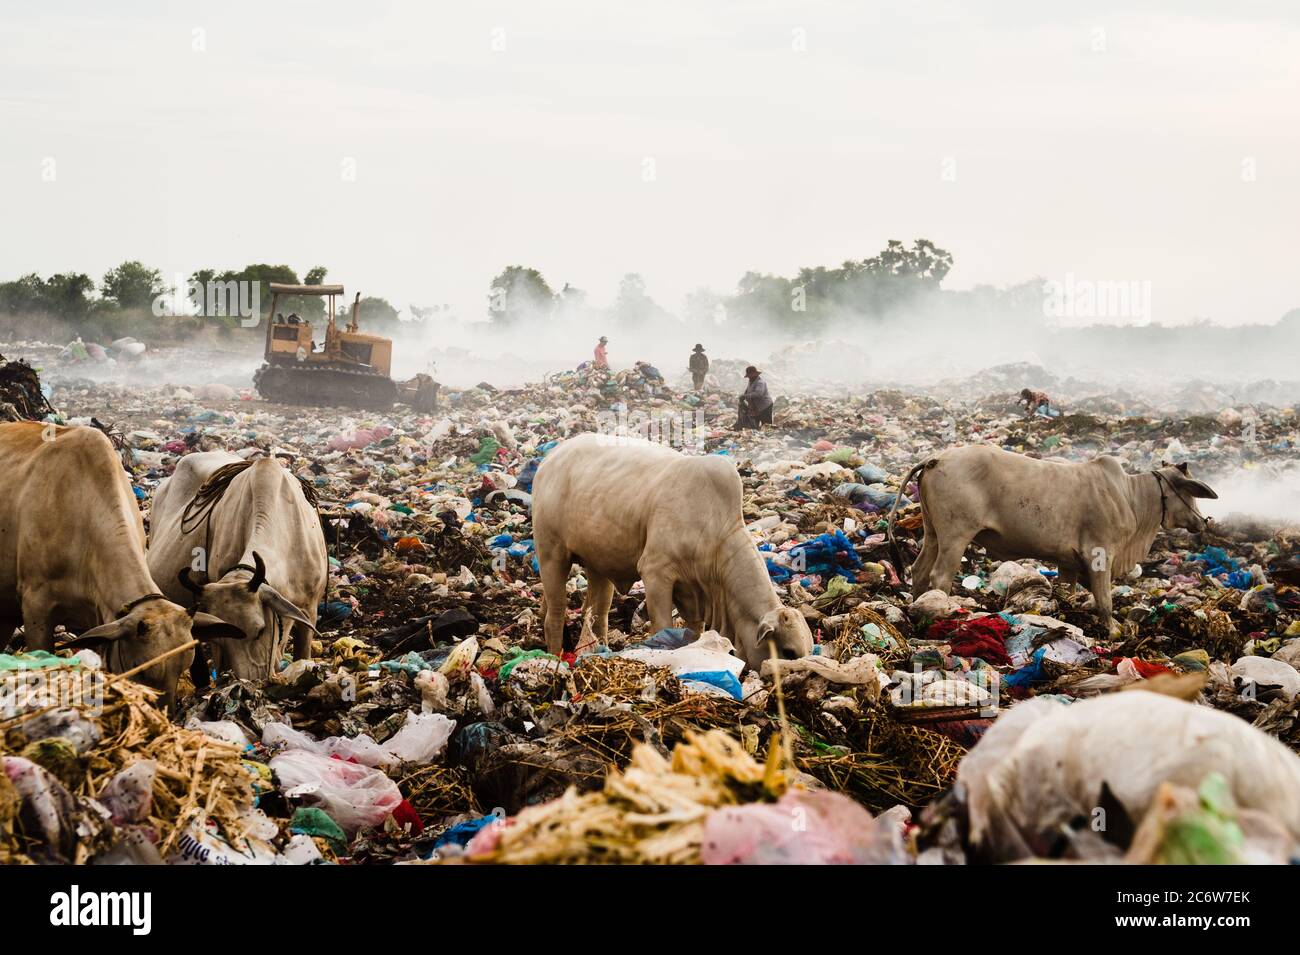 Cattle graze in smoldering garbage dump as workers sift through rubbish in the background Stock Photo